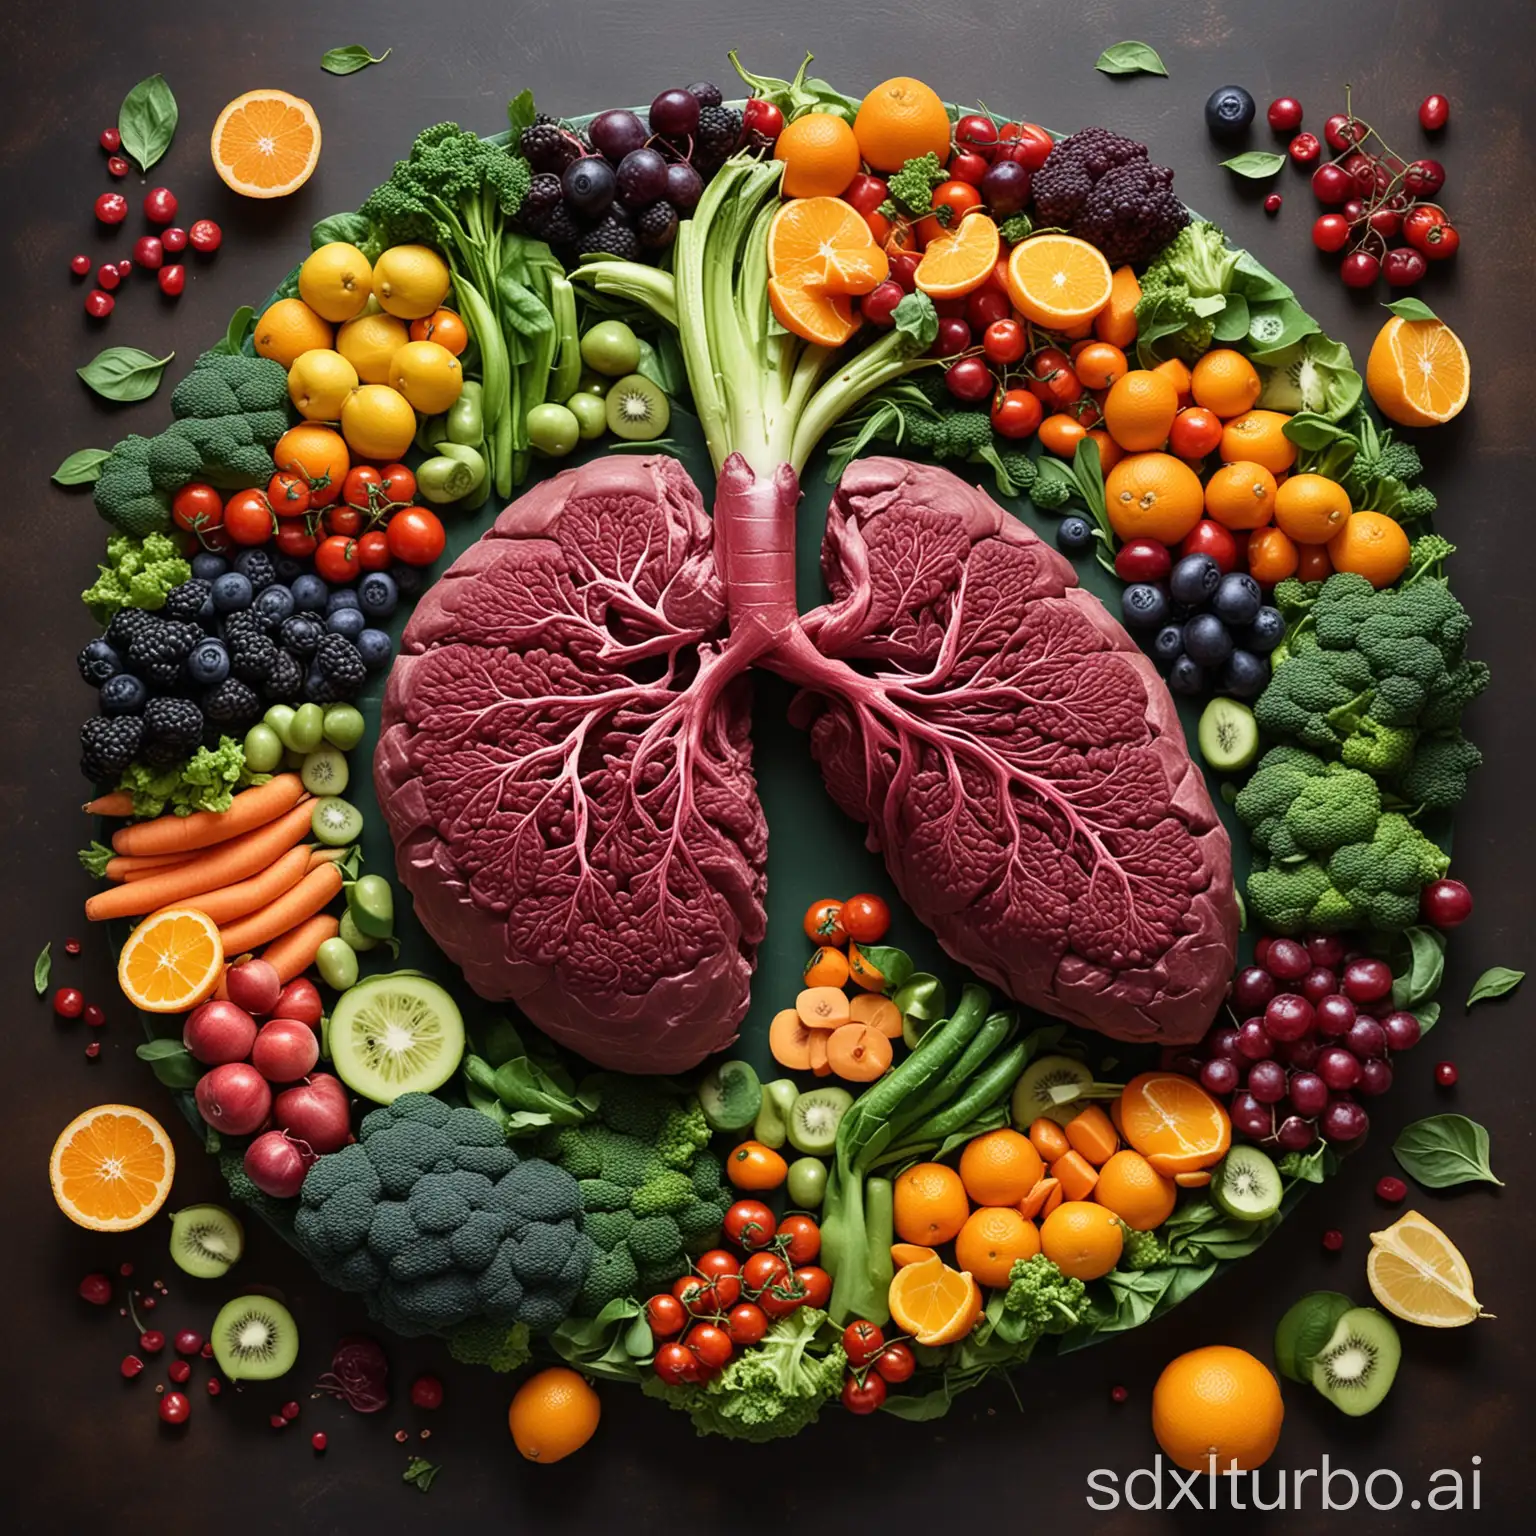 Image: The illustration shows a vibrant, healthy liver surrounded by various fruits and vegetables representing detoxification.
Description: Imagine a lush, green liver radiating vitality, surrounded by a variety of colorful fruits and vegetables symbolizing the detoxifying power of glutathione. Bright orange, deep purple, and verdant green showcase a variety of nutrients that support detoxification and immune function. Caption: "Nourish your body with glutathione to keep your liver vibrant and enhance your immune system. The bottle is black with a white cap, and the capsules inside are also black. #Detox #ImmuneBoost"